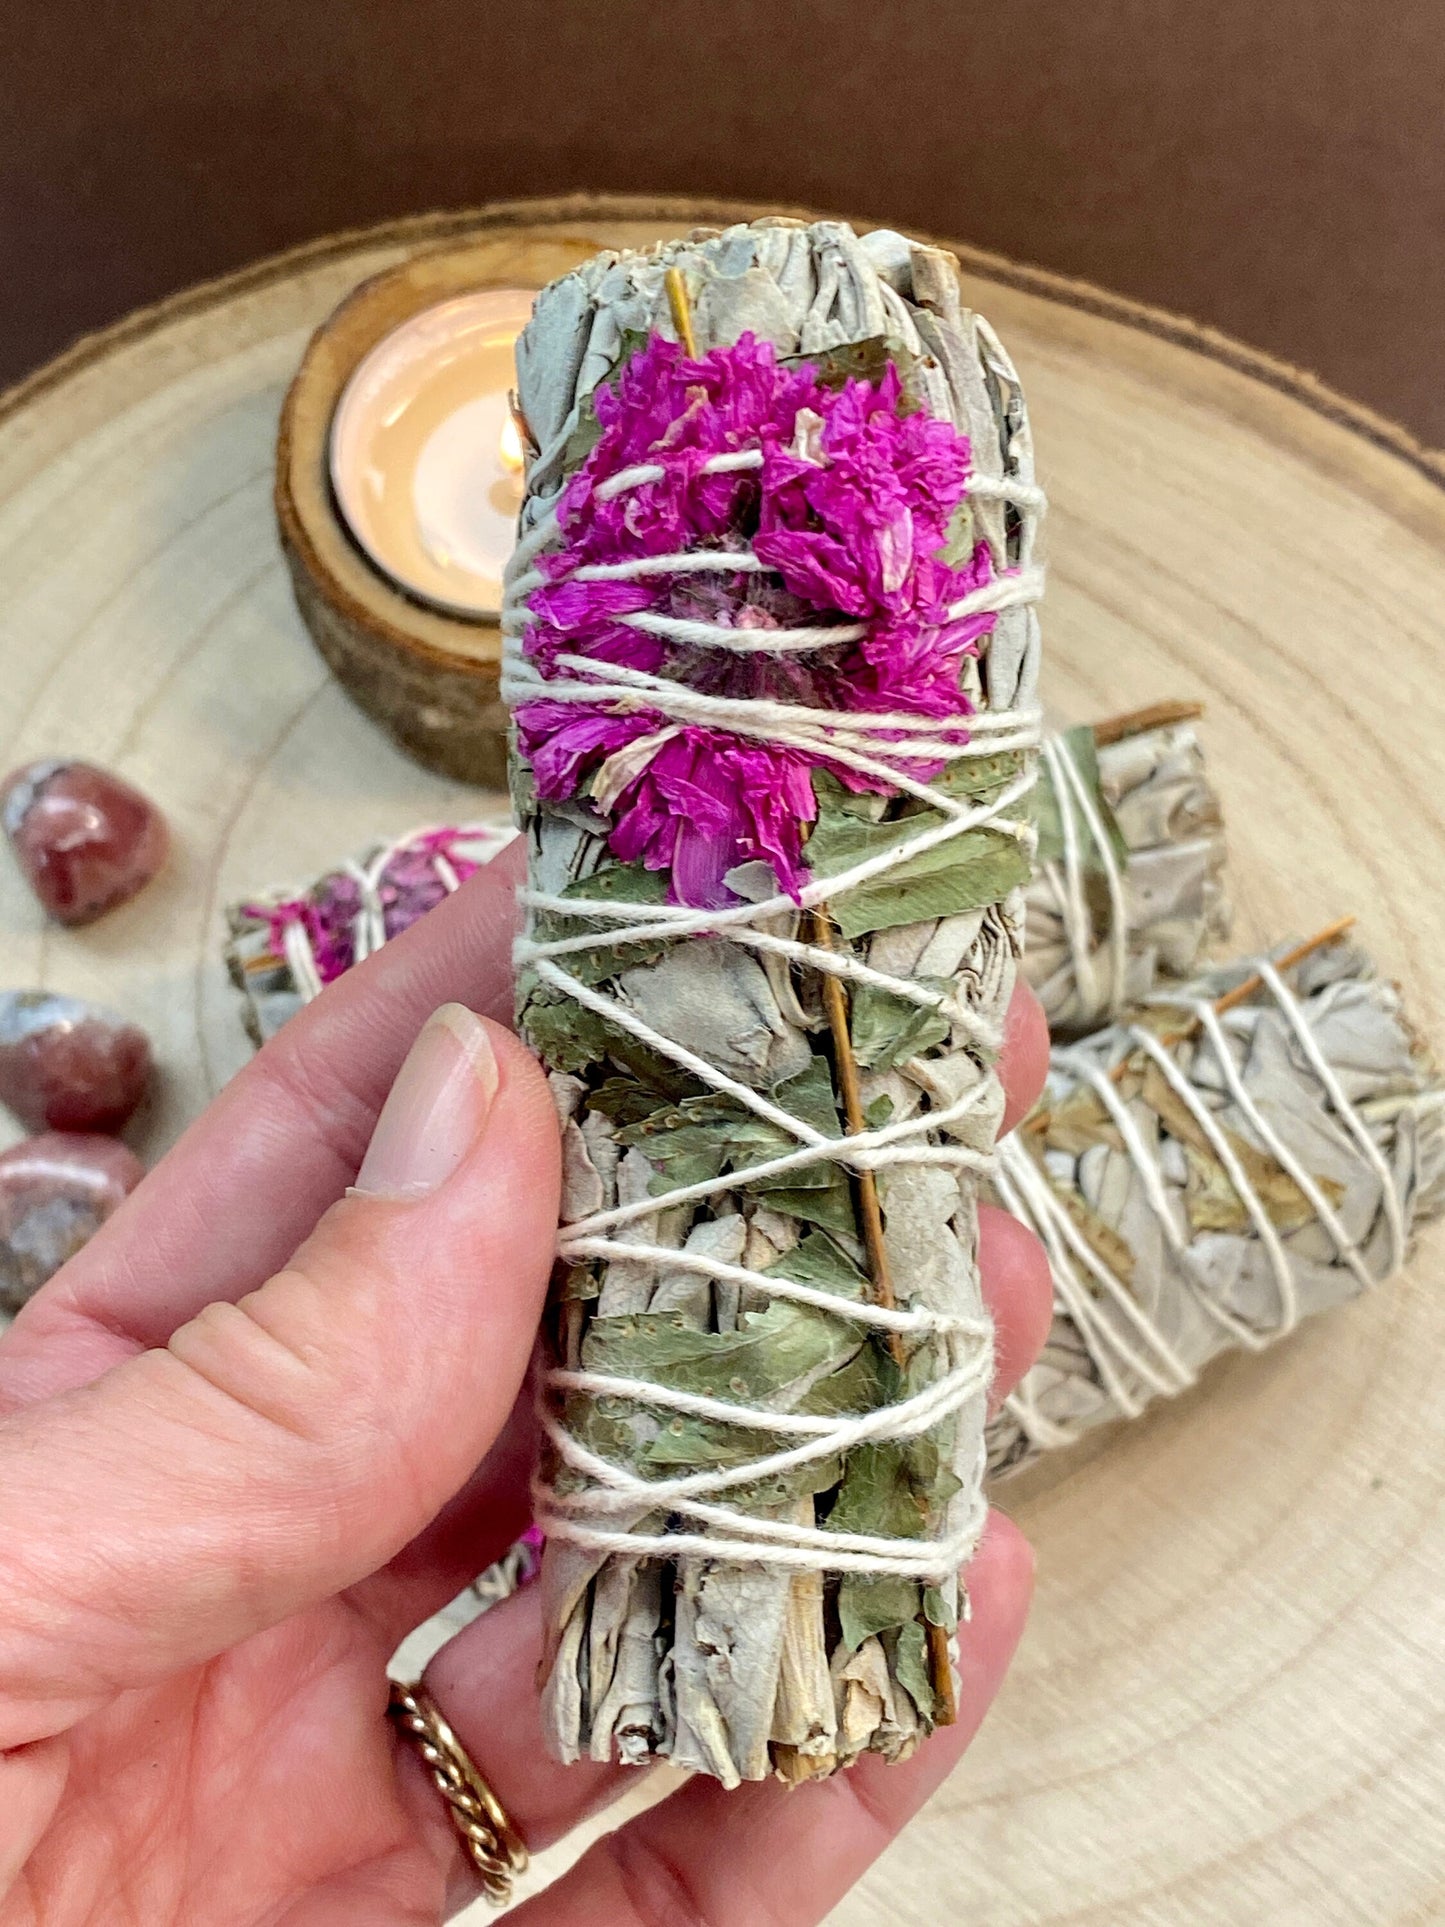 Sage Smudge Stick with Dahlia, Cleanse your home, crystals and you, Smudge stick for transformation, transition and change